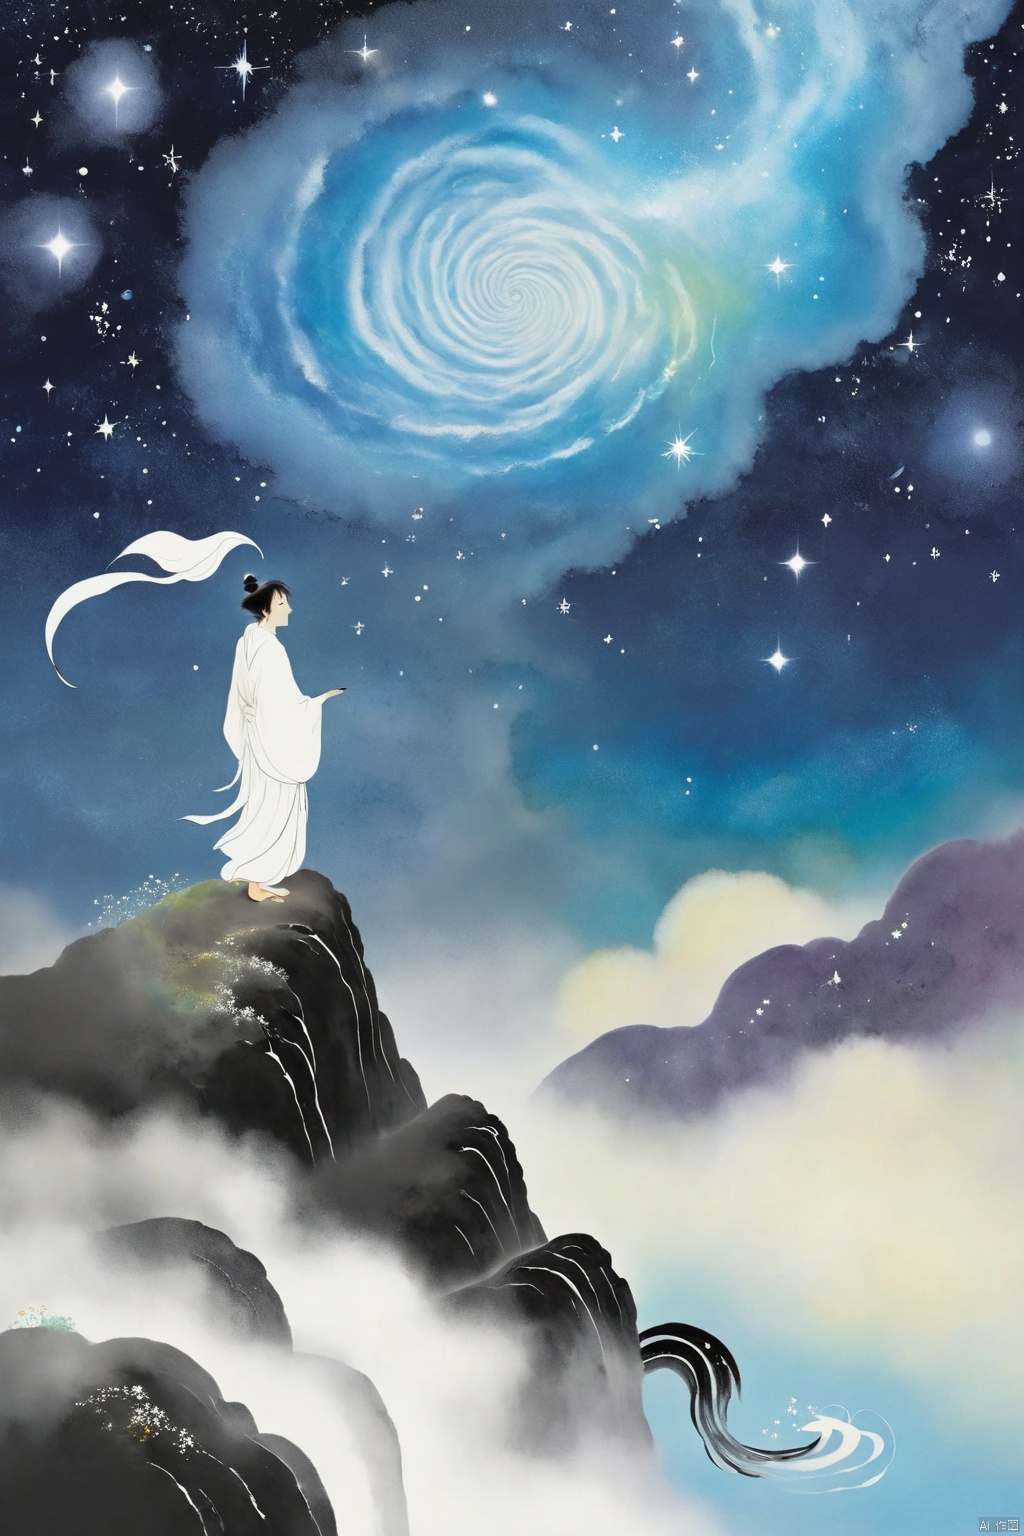  Tie dyeing style, Tie dyeing,Shinkai Makoto style, a whimsical digital illustration of a solitary figure standing on a cliff overlooking the vast starry sky. The figure has a wistful expression, his hair blown by the wind and his robe flowing. The sky is filled with rotating galaxies and constellations, creating a fantastic atmosphere. Bright colors, ethereal lights